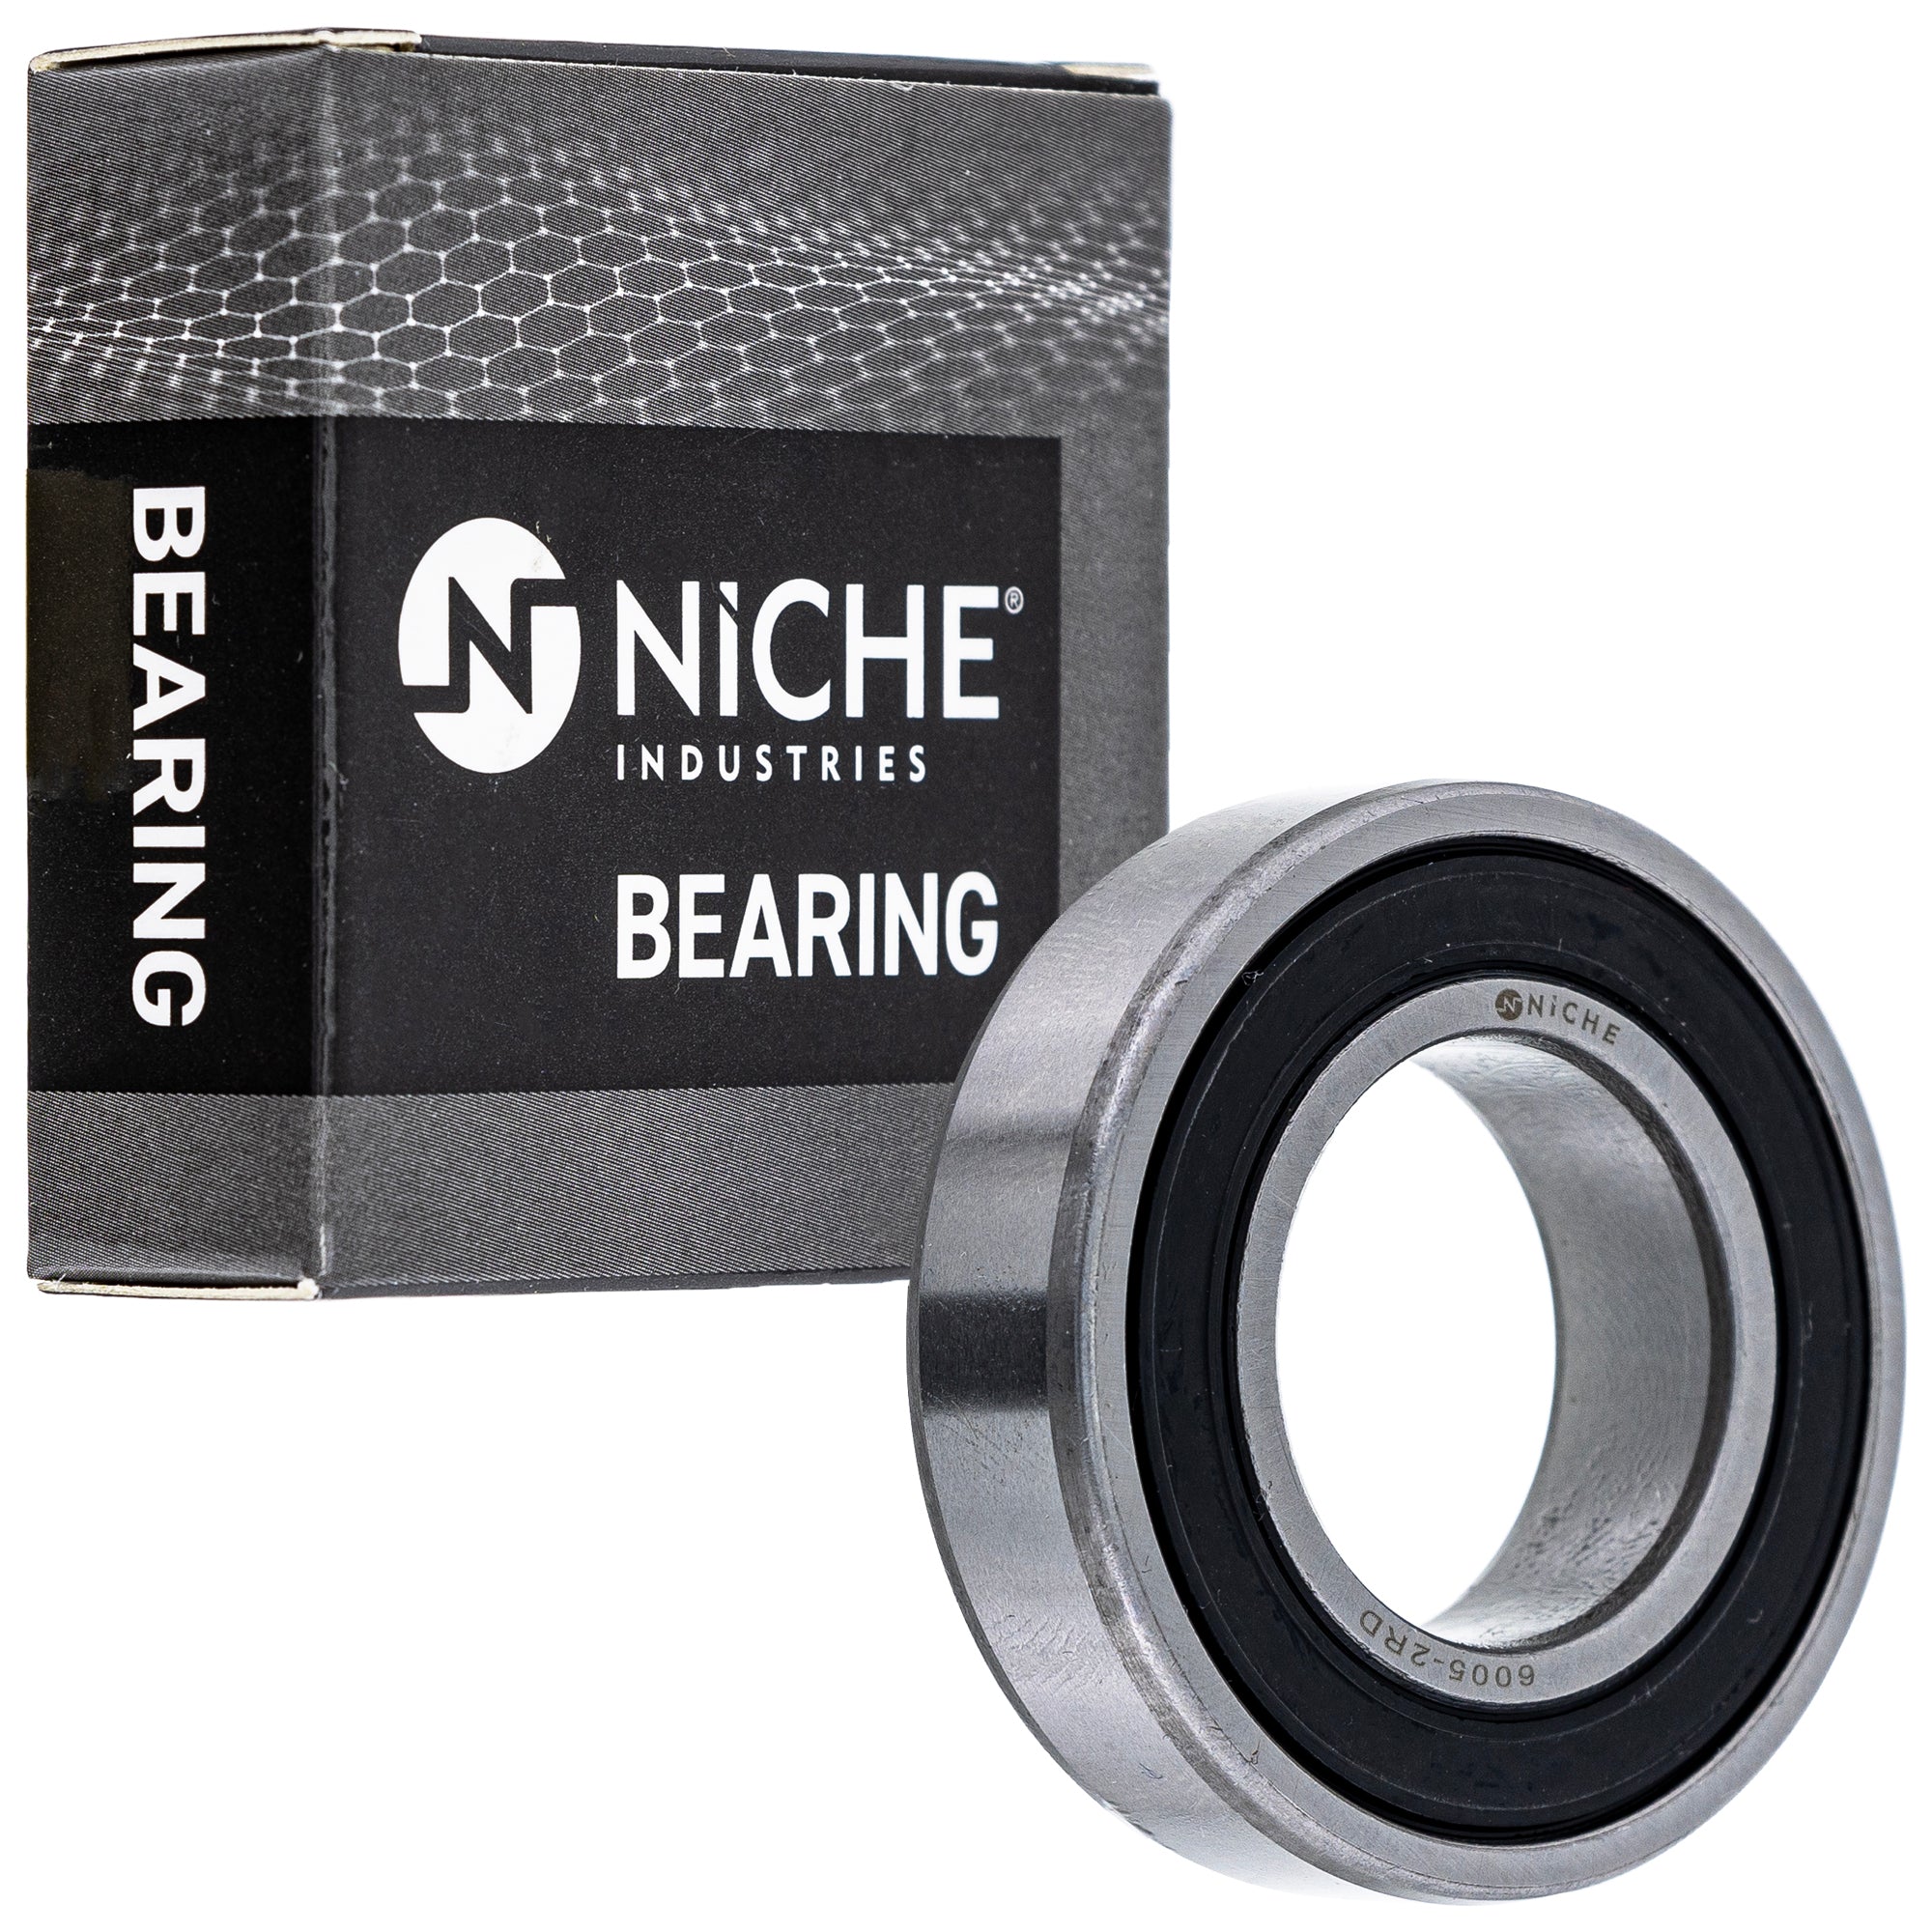 NICHE 519-CBB2339R Bearing 2-Pack for zOTHER RC51 Pro FourTrax